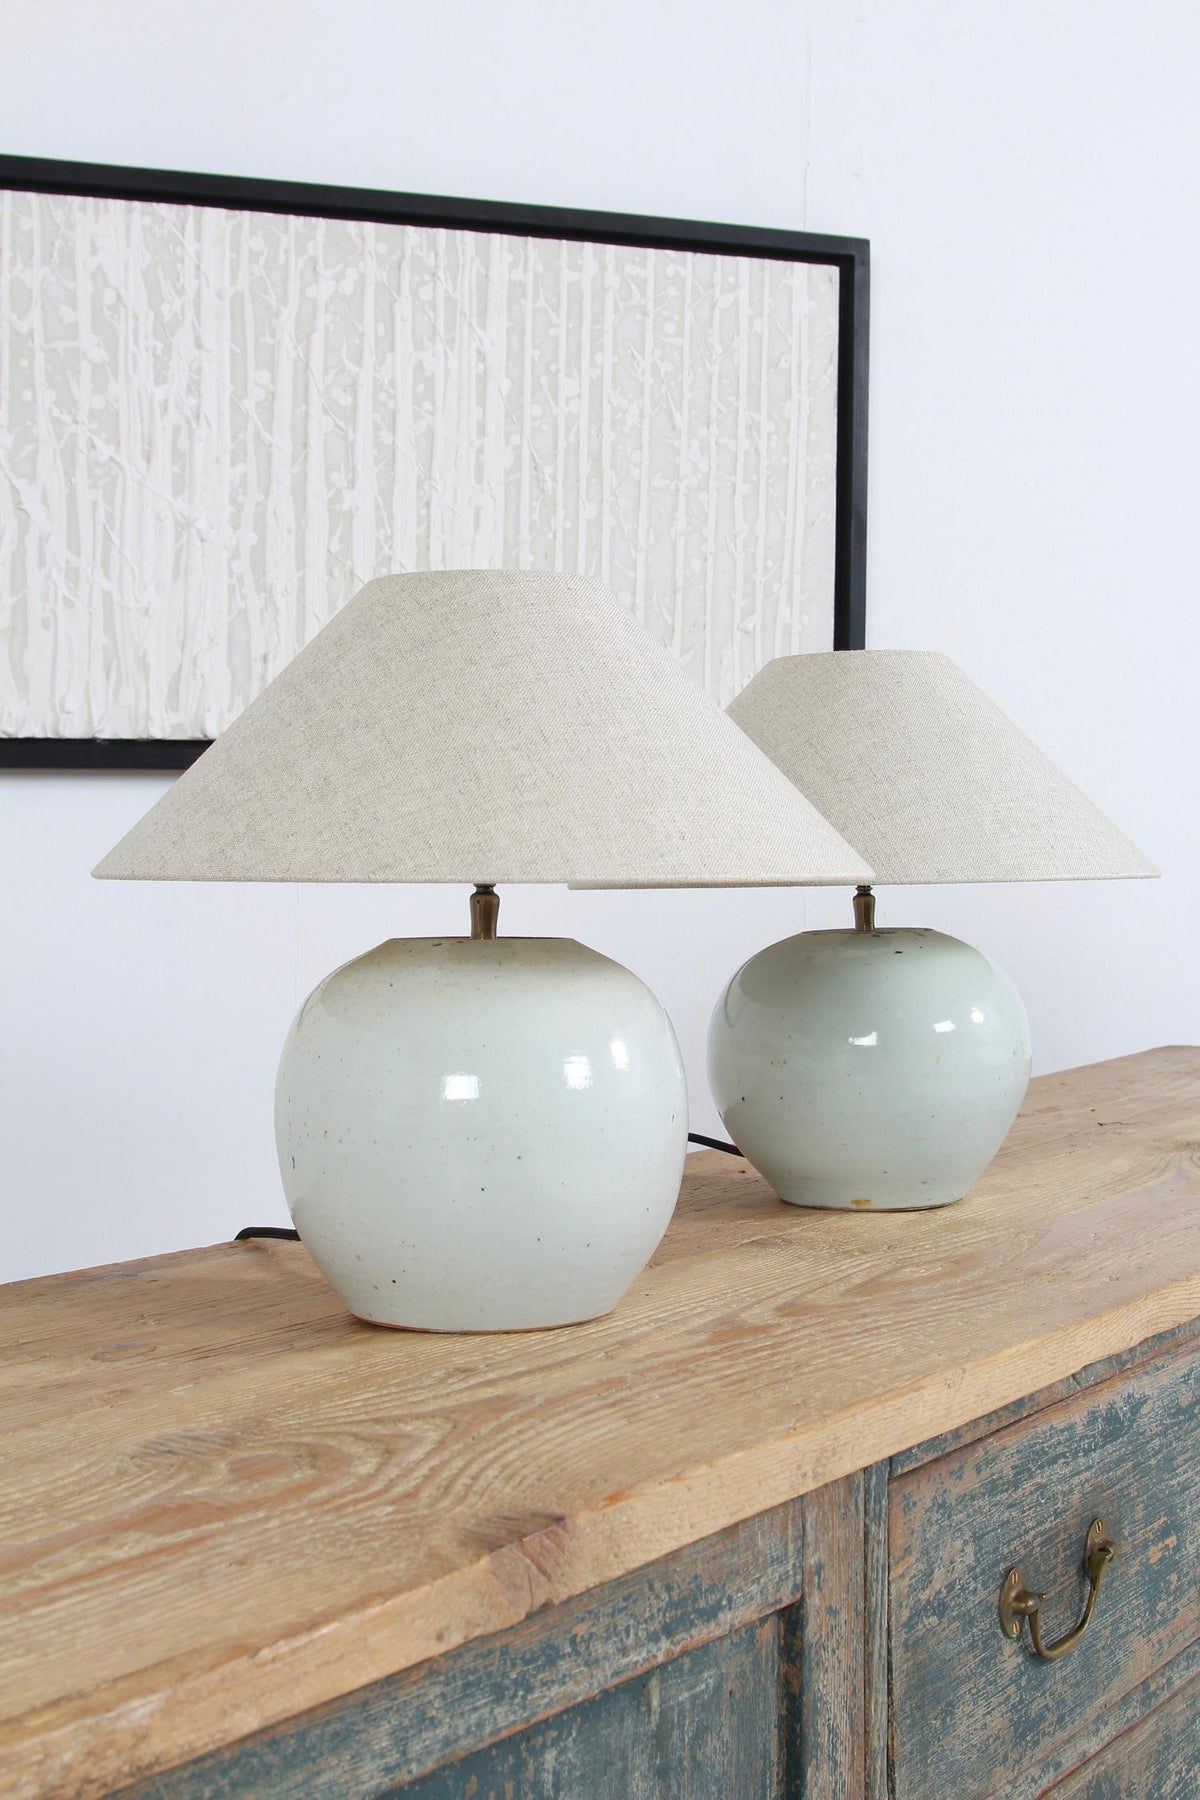 CHARMING Near Pair of  ANTIQUE CHINESE GINGER JAR TABLE LAMPs WITH NATURAL LINEN SHADES